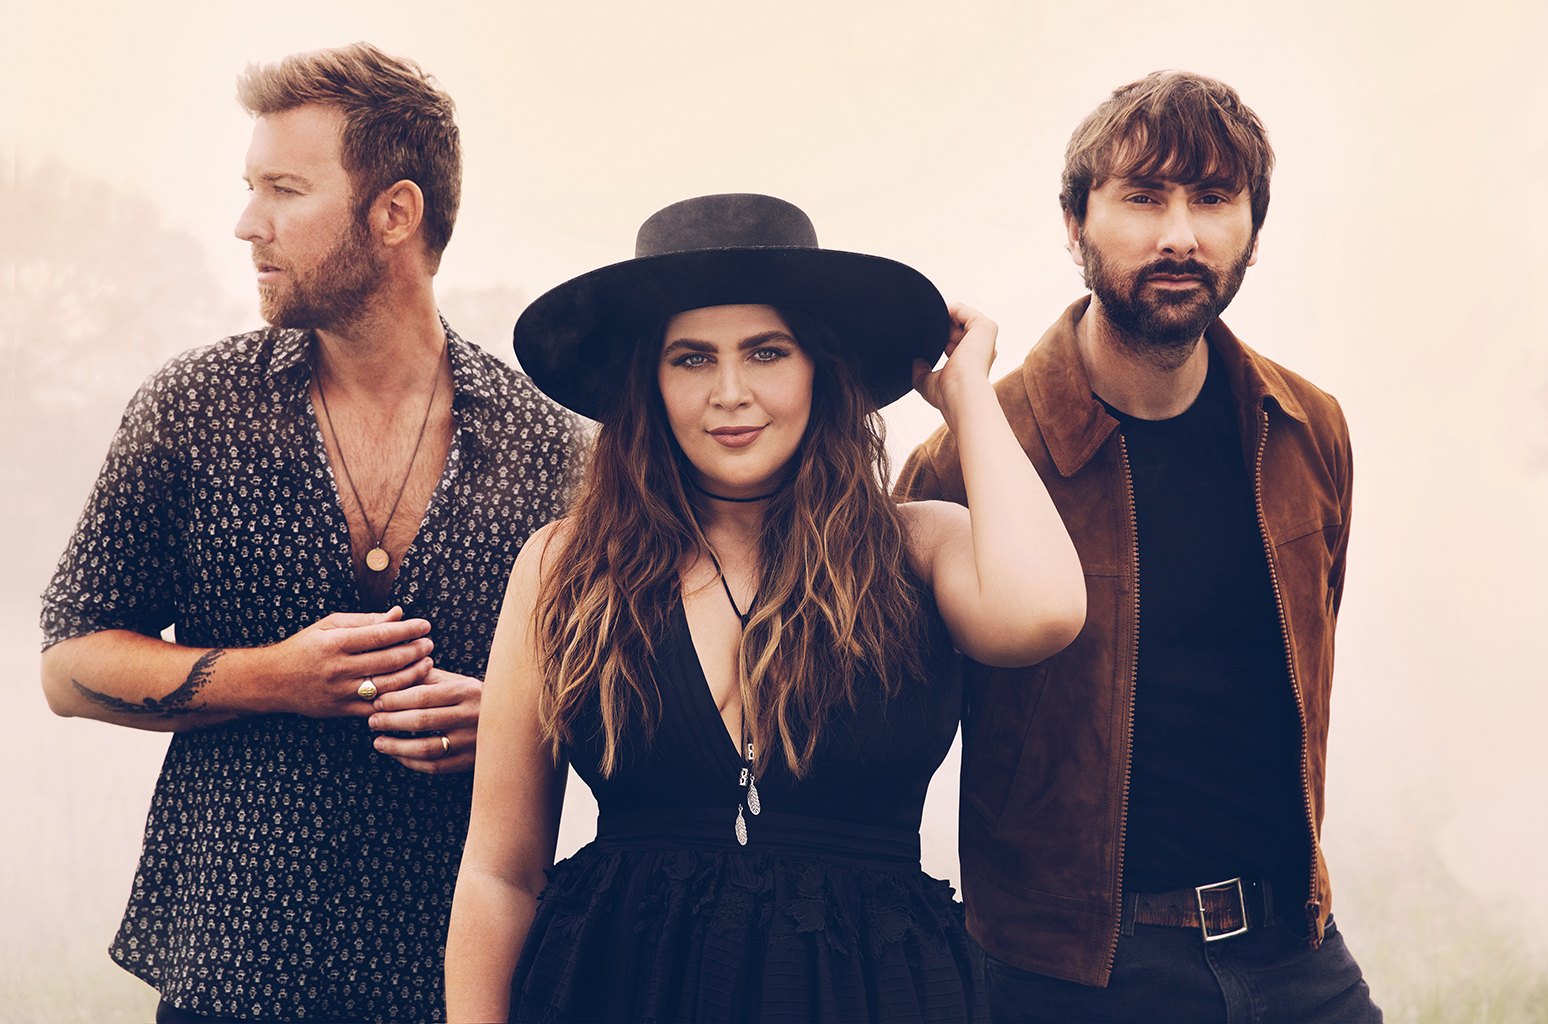 Lady Antebellum Back at No. 1 on Country Airplay Chart: 'The Feeling Never Gets Old'